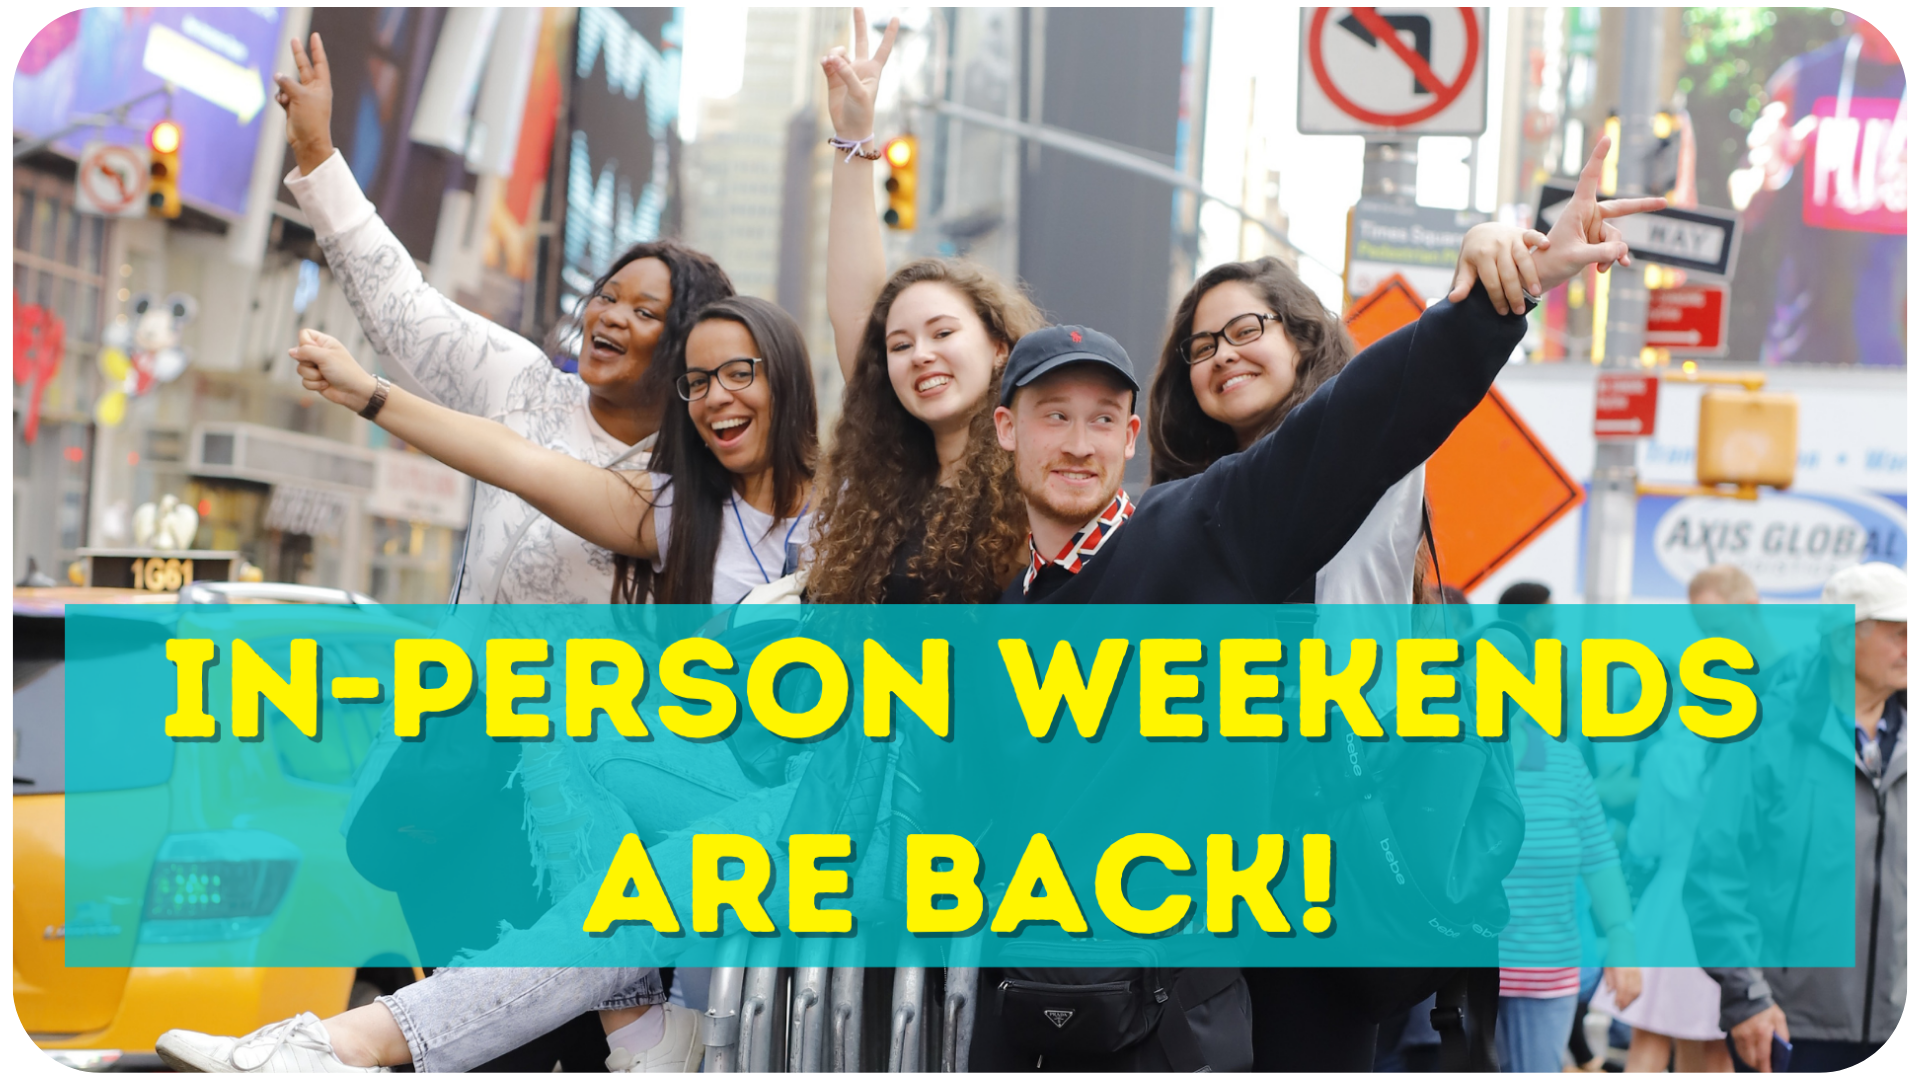 In-Person Weekends Are Back!